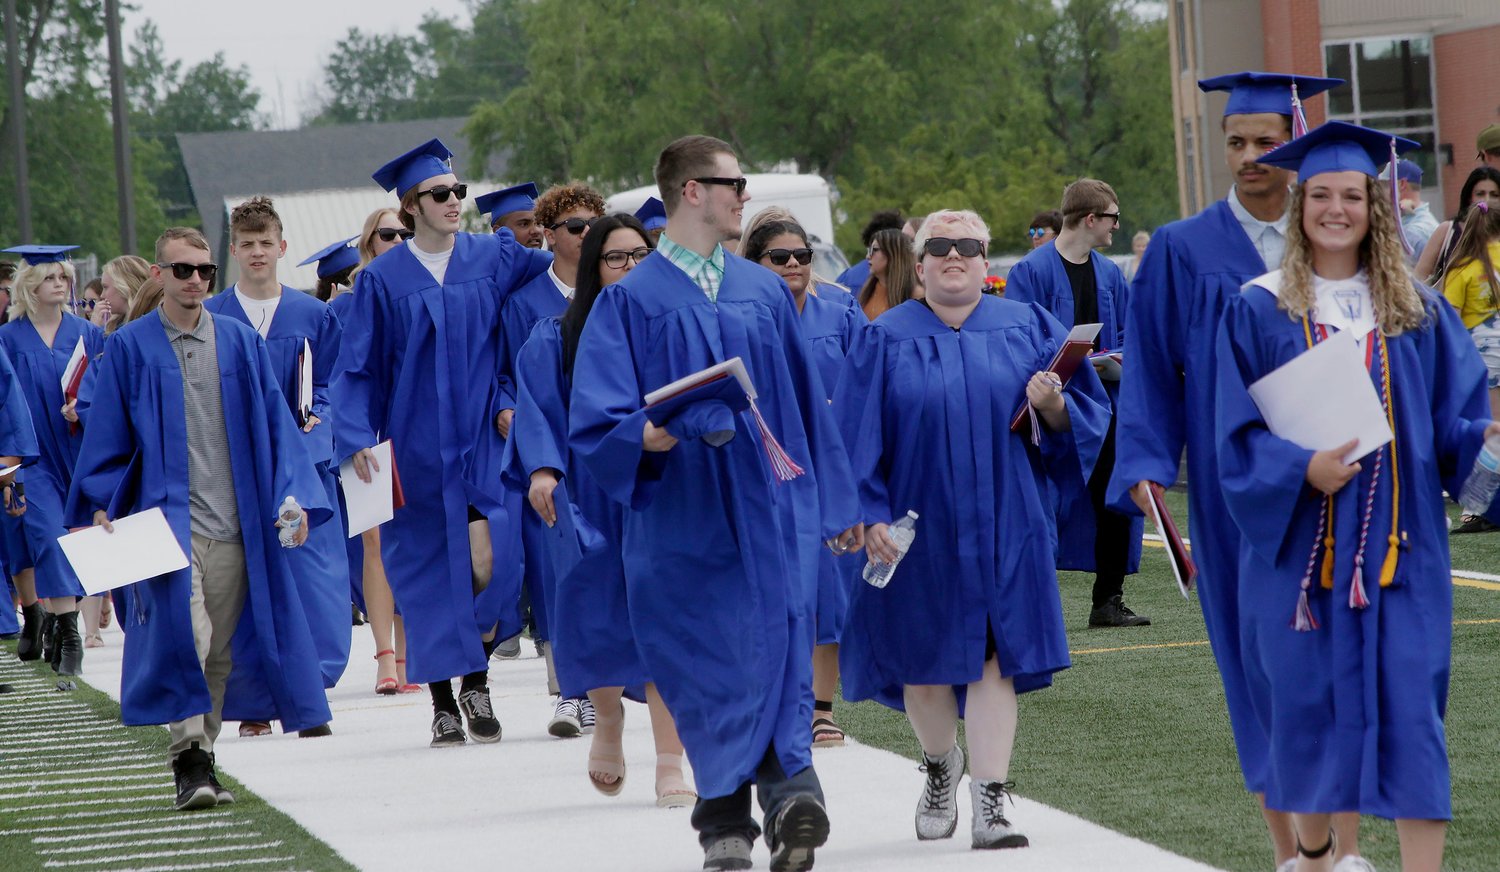 Moberly High School Class of 2021 graduates leave Dr. Larry K. Noel Spartan Stadium at the end of the 53rd Commencement ceremony while the band plays the school's fight song.